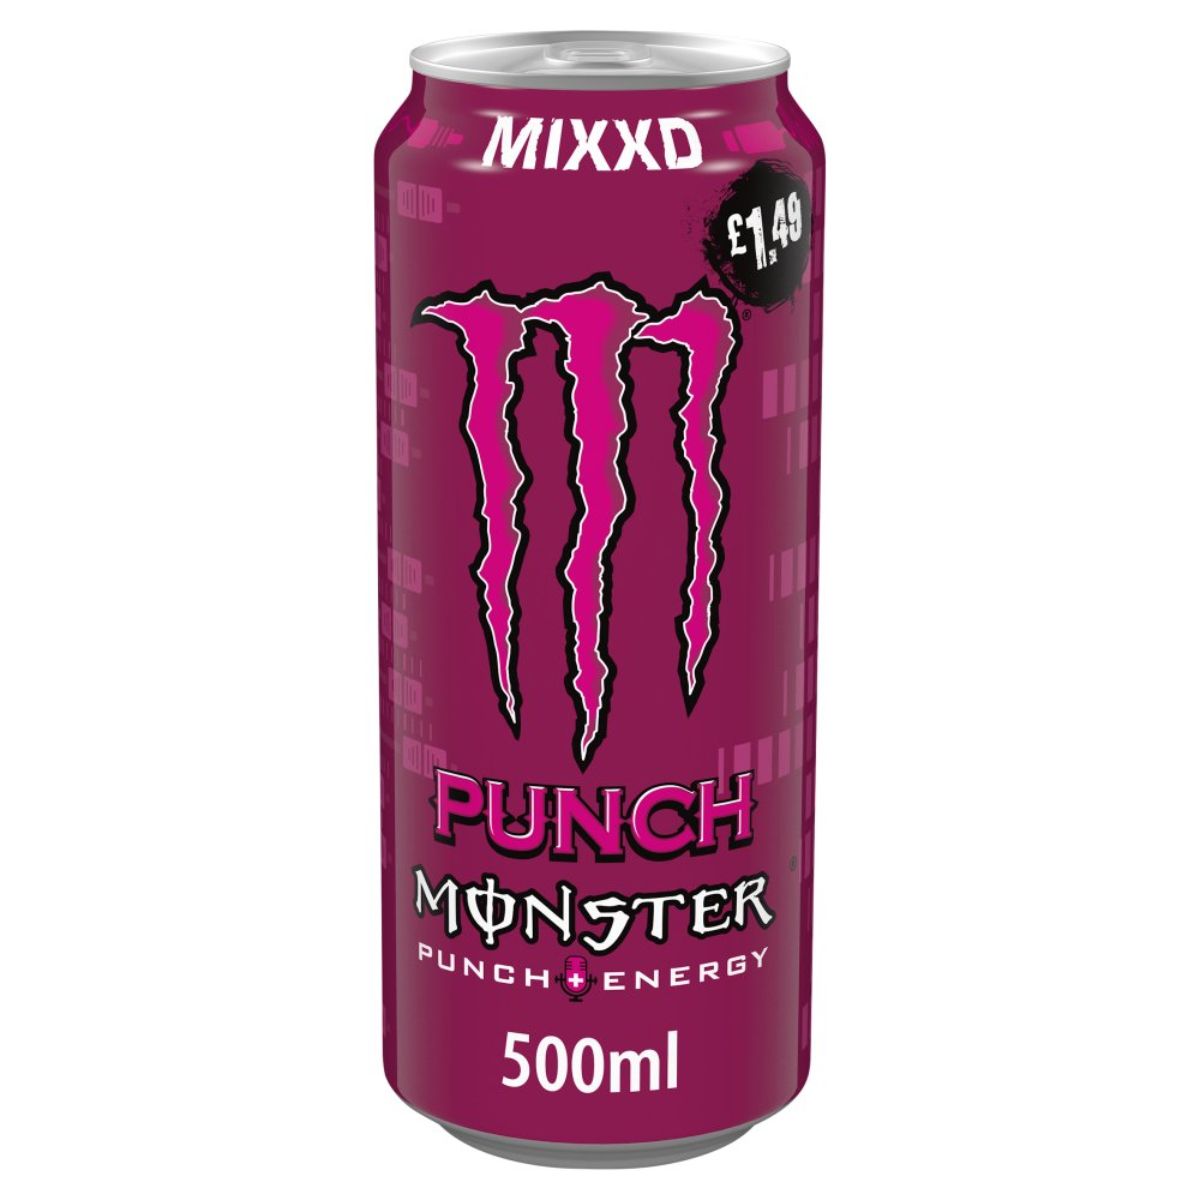 Monster - Mixxd Punch Energy Drink - 500ml.